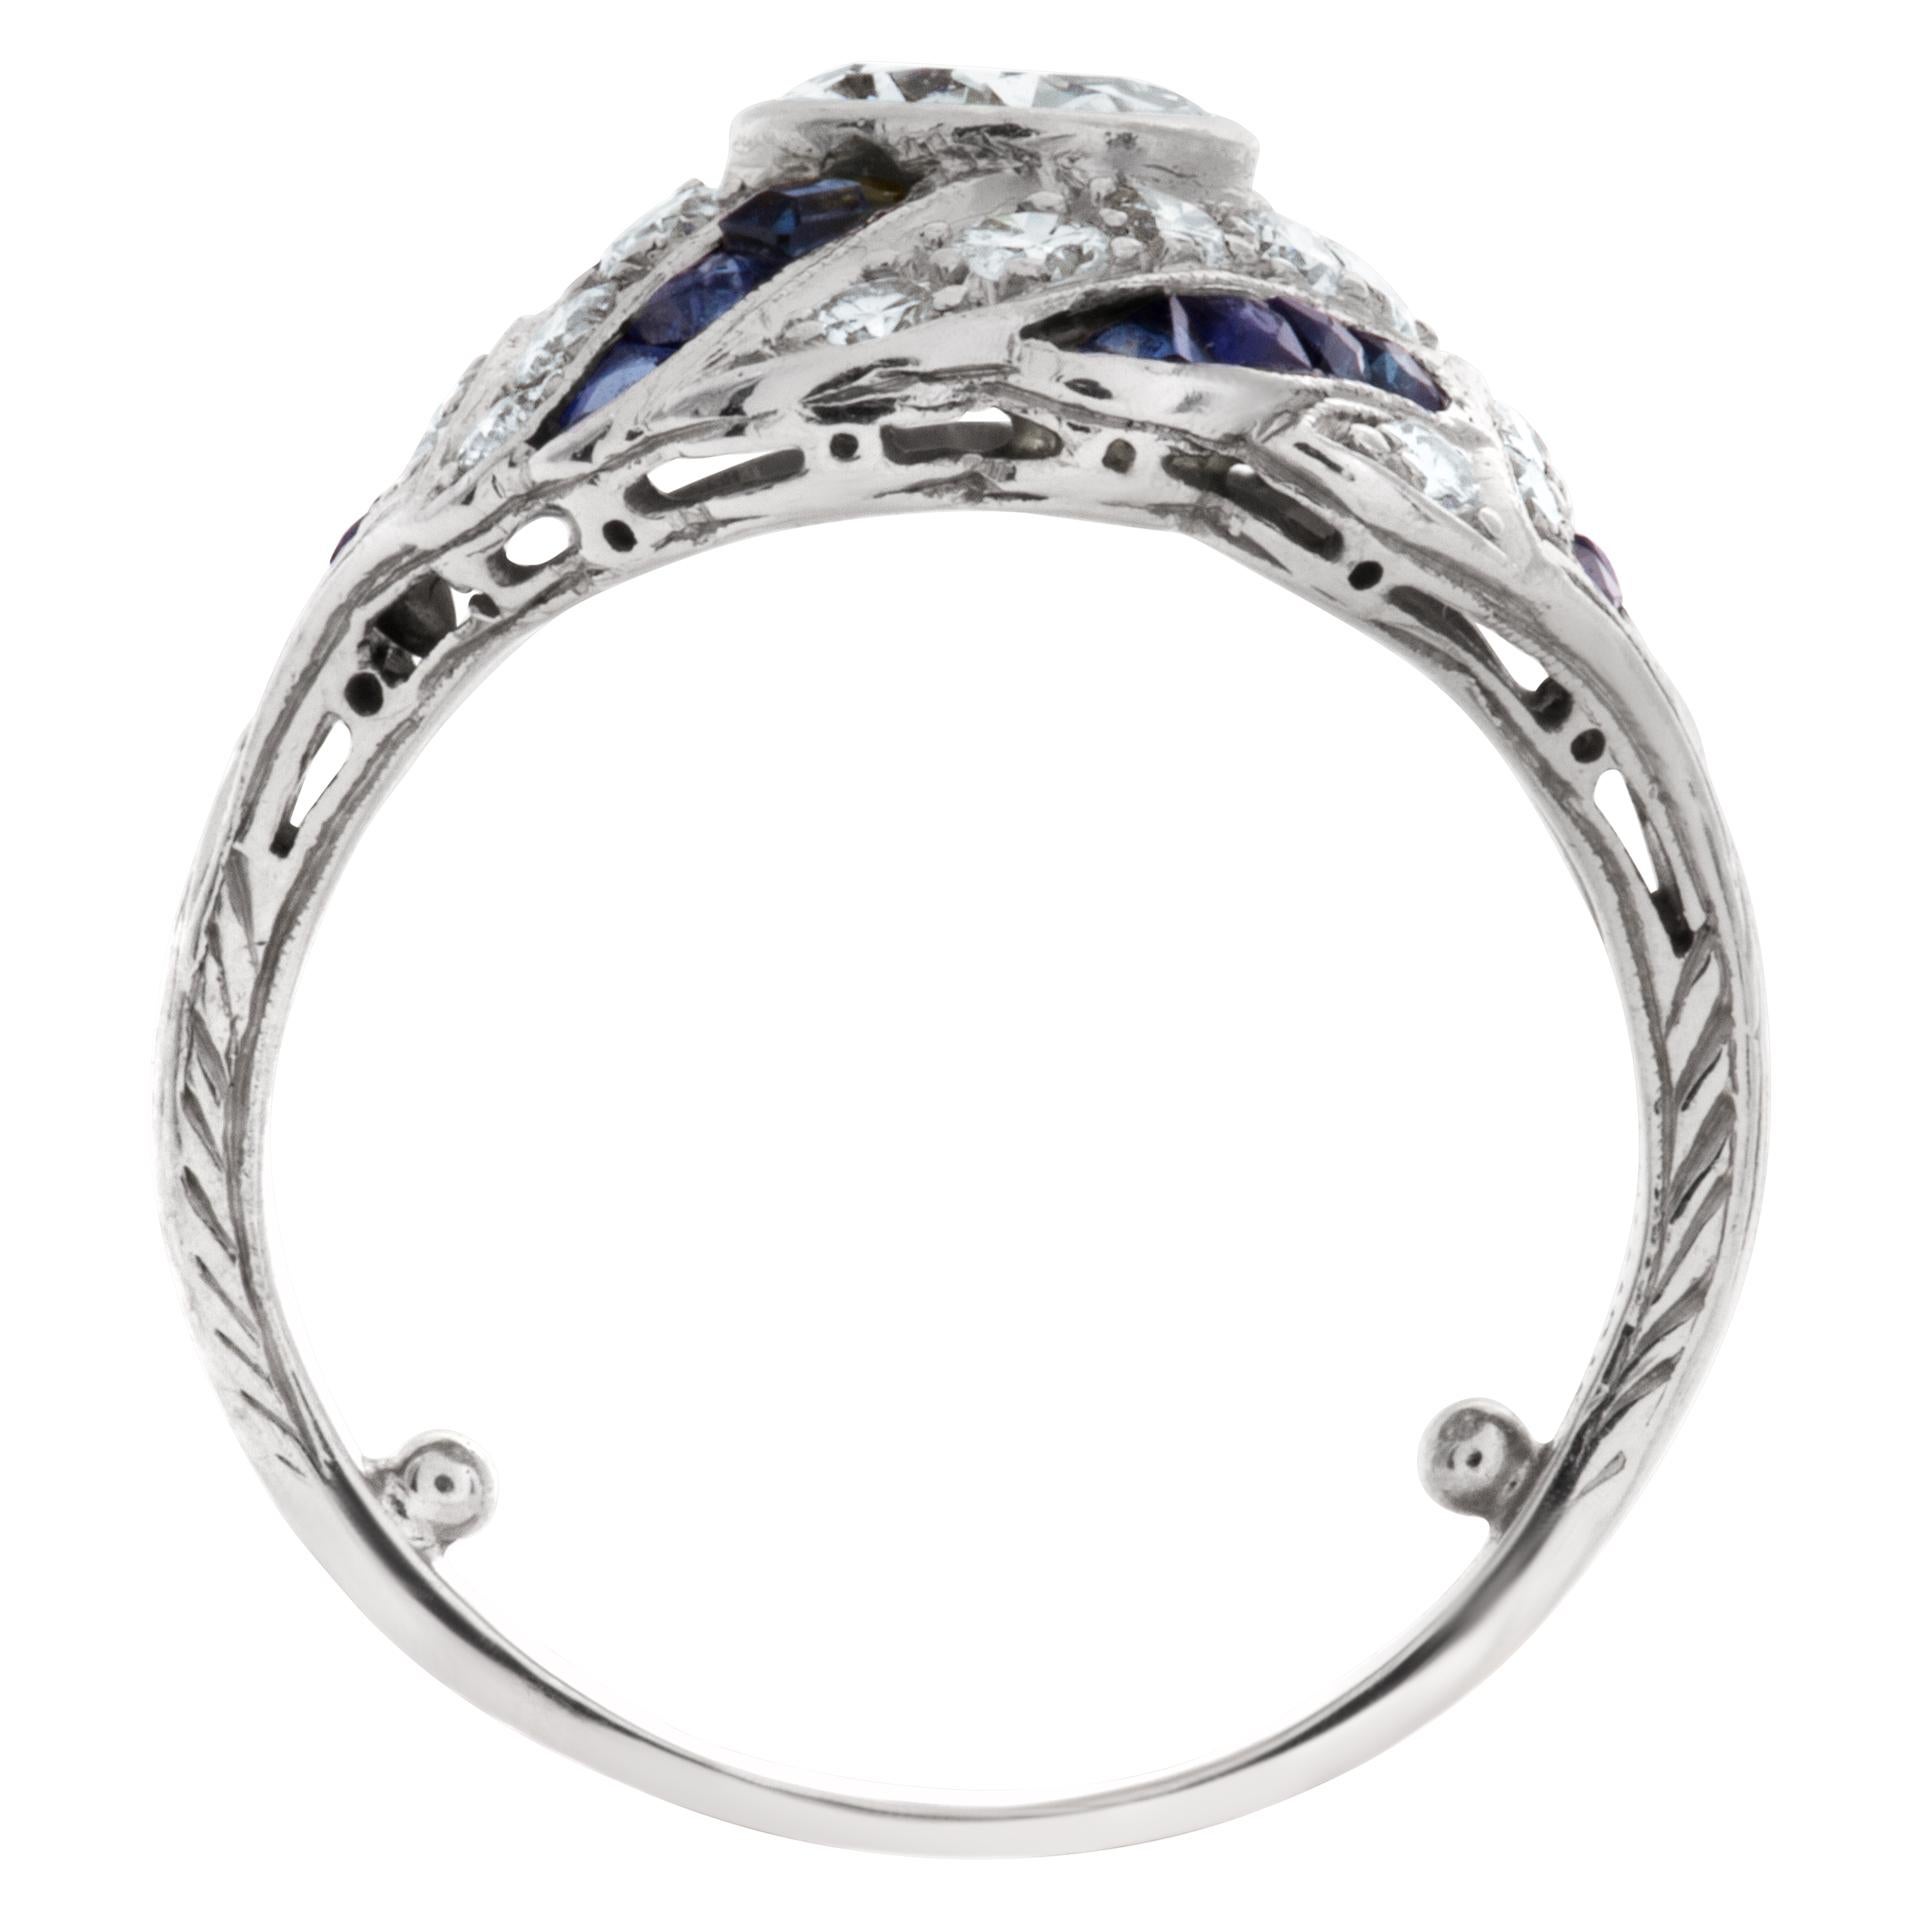 ESTIMATED RETAIL $7,000.00 - YOUR PRICE $4,250.00 - Diamond and sapphire Art Deco ring in platinum with center Old European cut diamond (0.75 carats J-K color, SI clarity) surrounded by 0.75 carats in a swirl of diamonds and 0.75 carats in mixed-cut